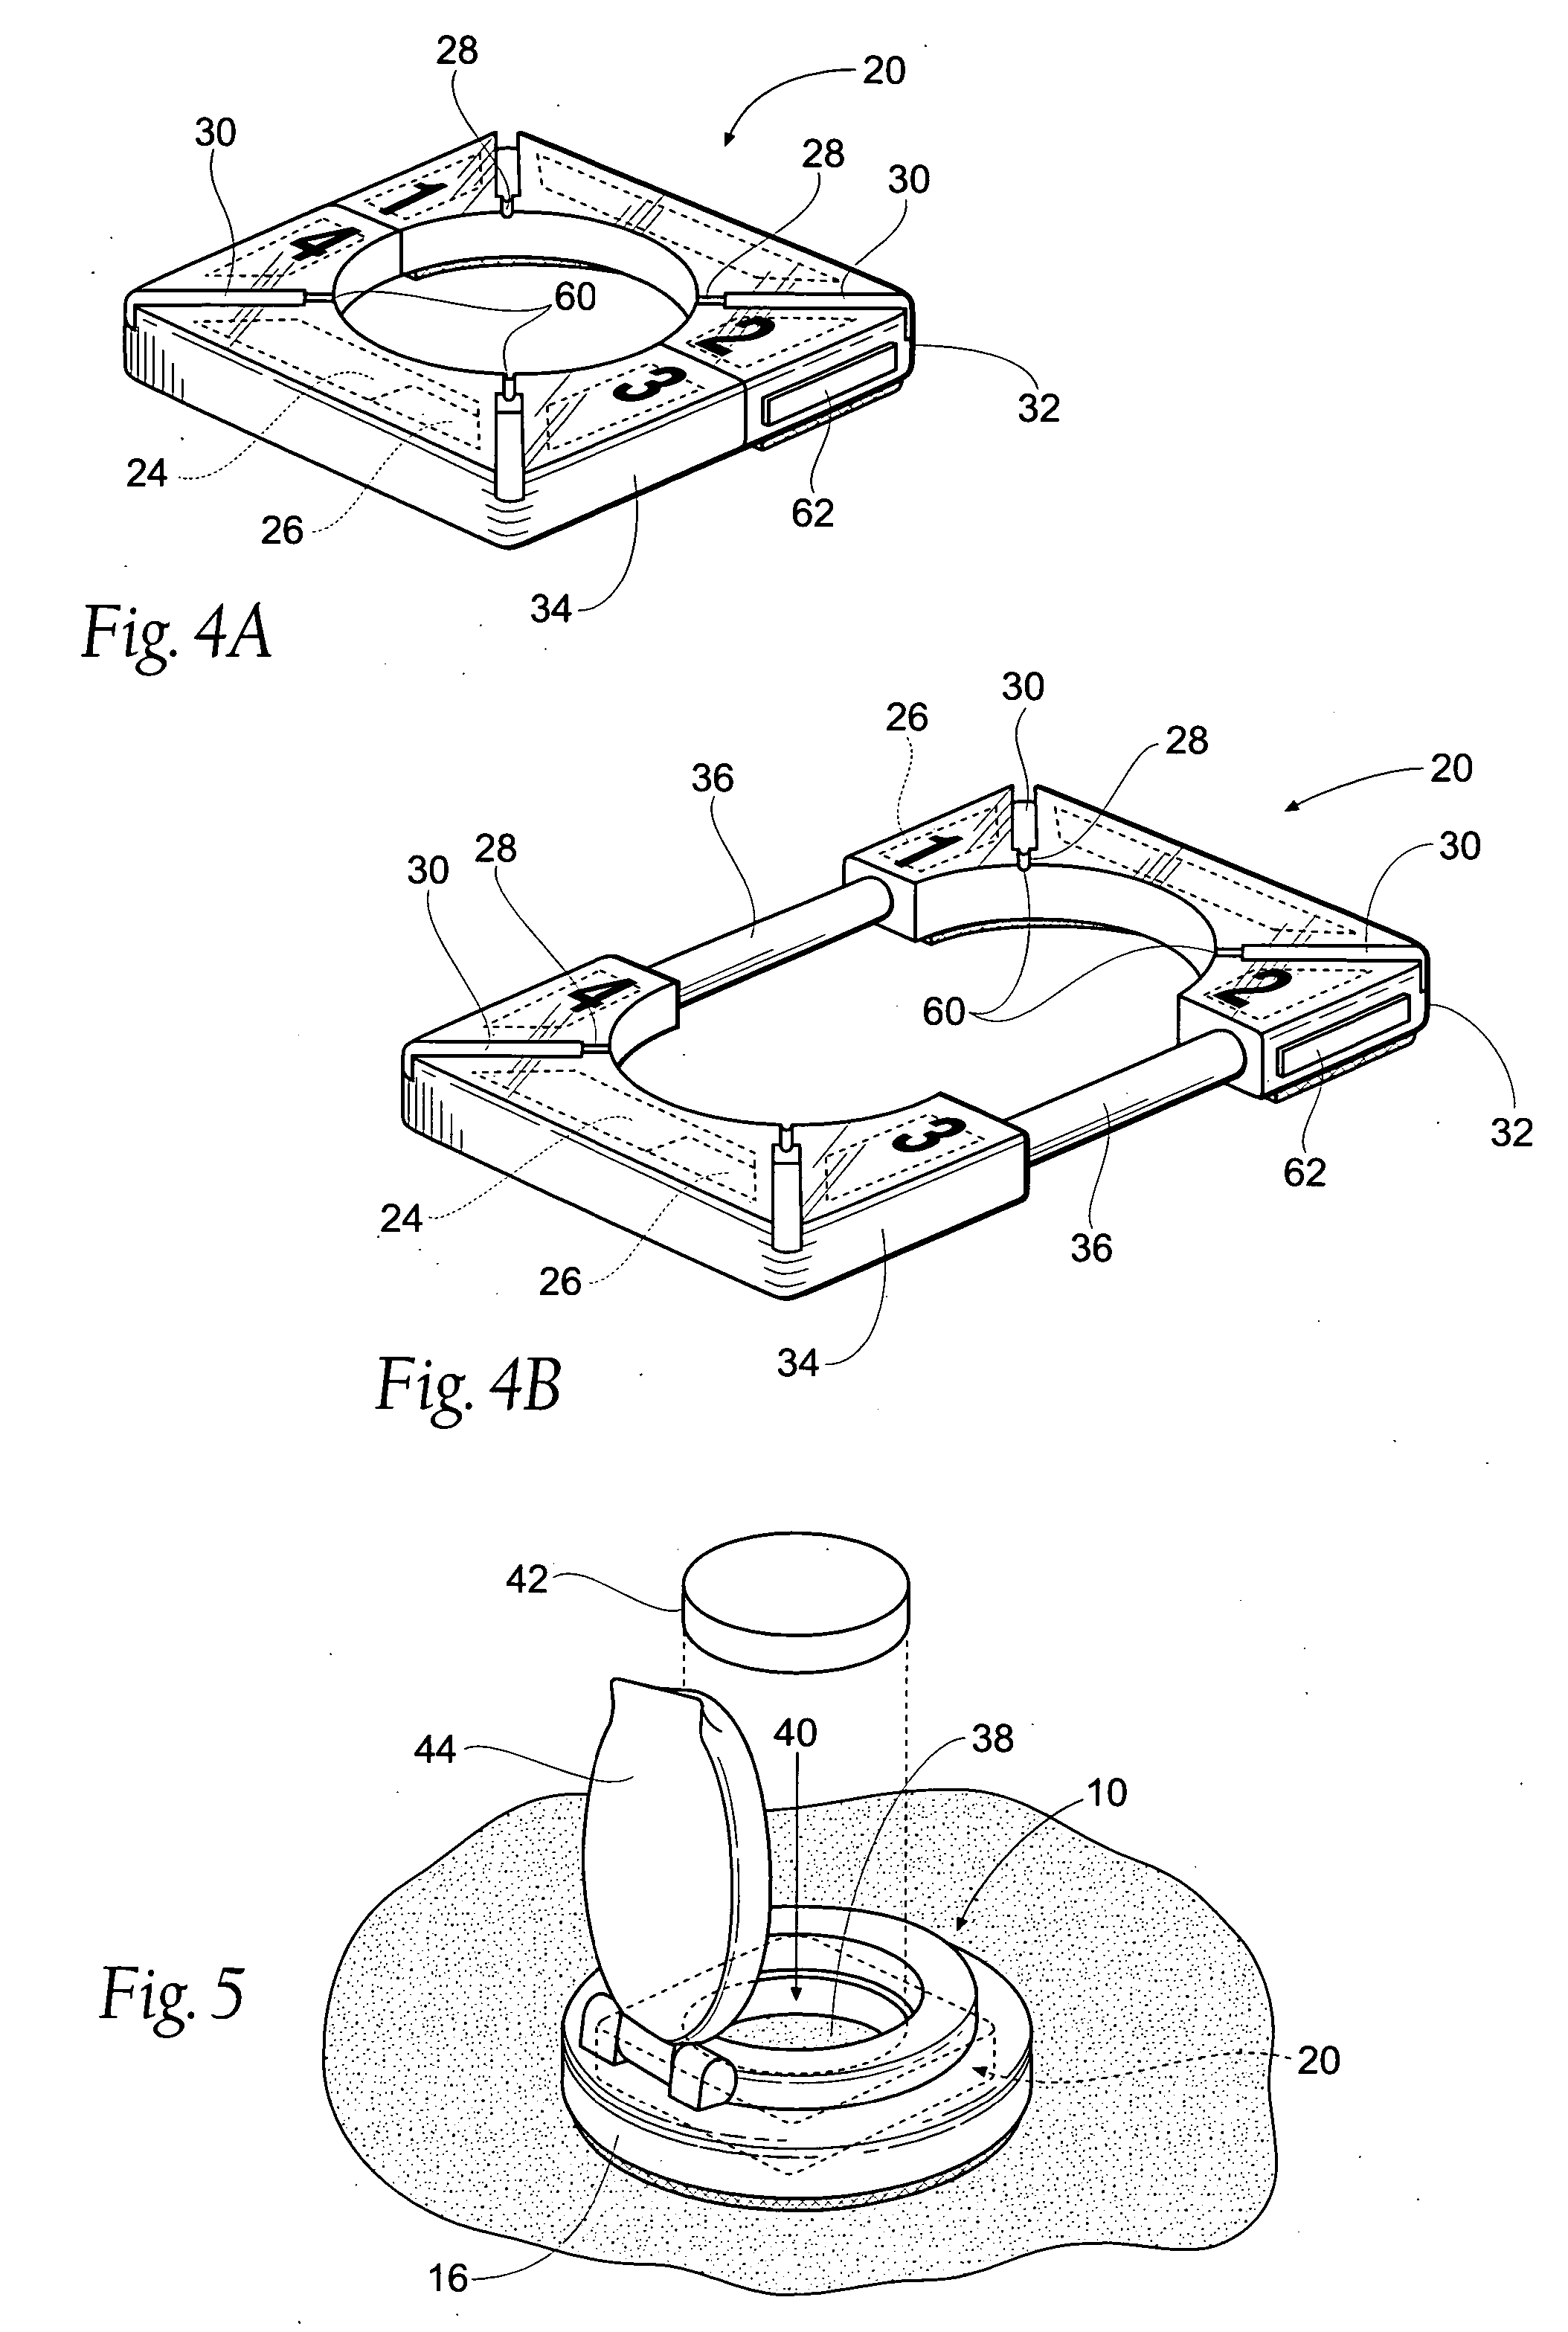 Portable assemblies, systems and methods for providing functional or therapeutic neuromuscular stimulation